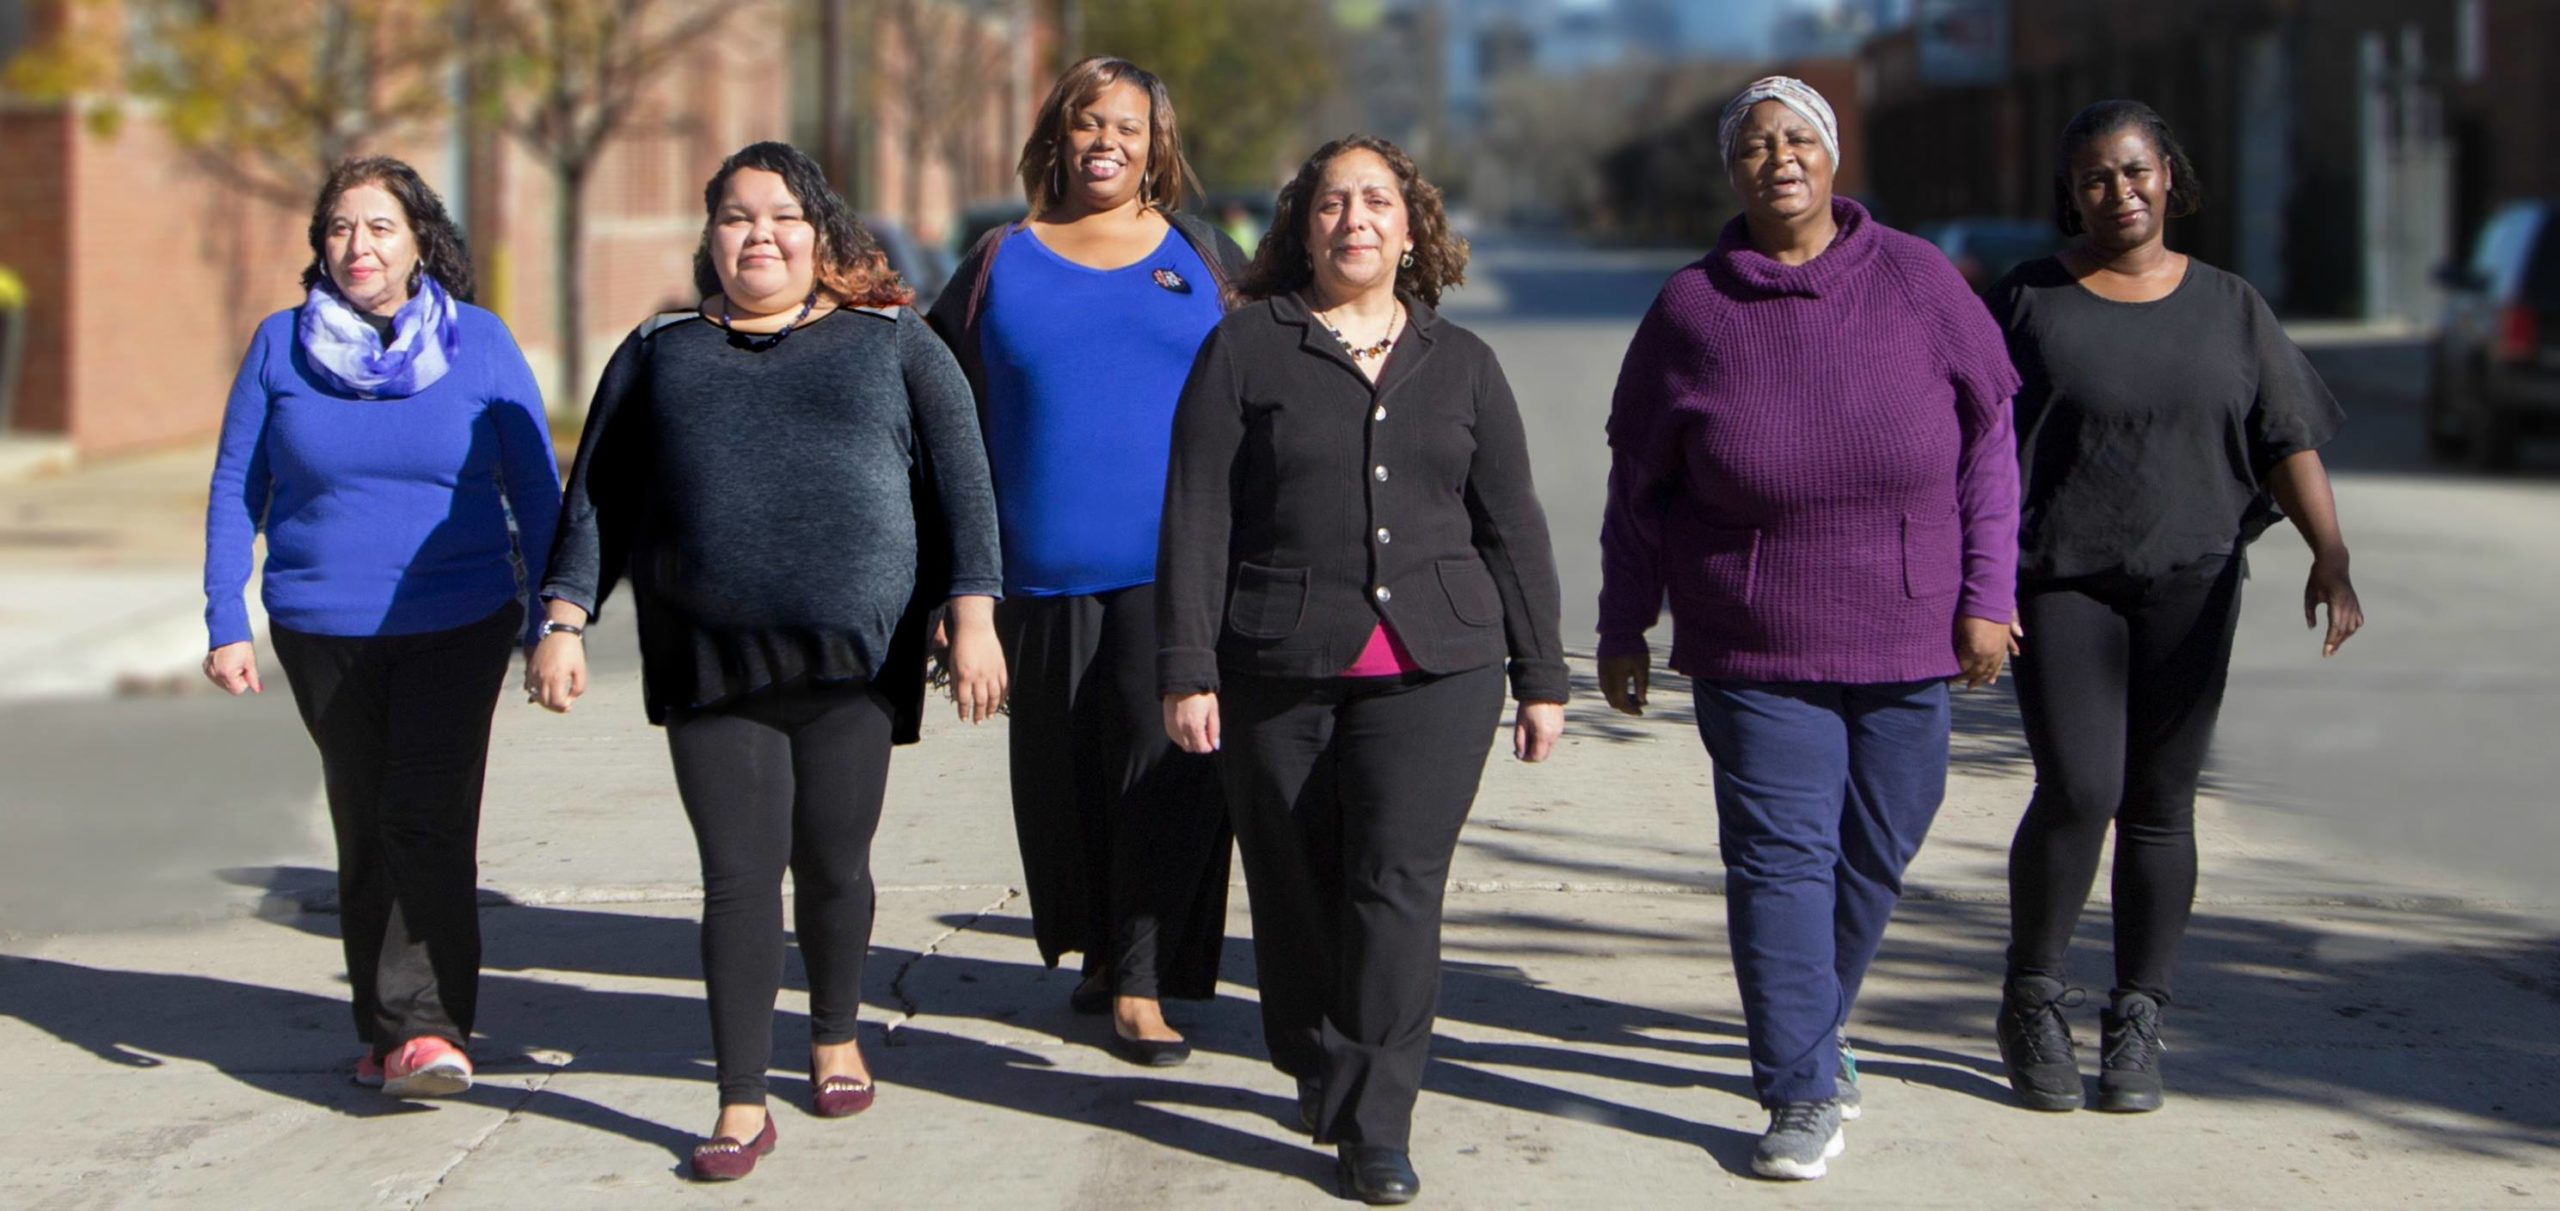 A group of powerful, confident women stride towards the camera